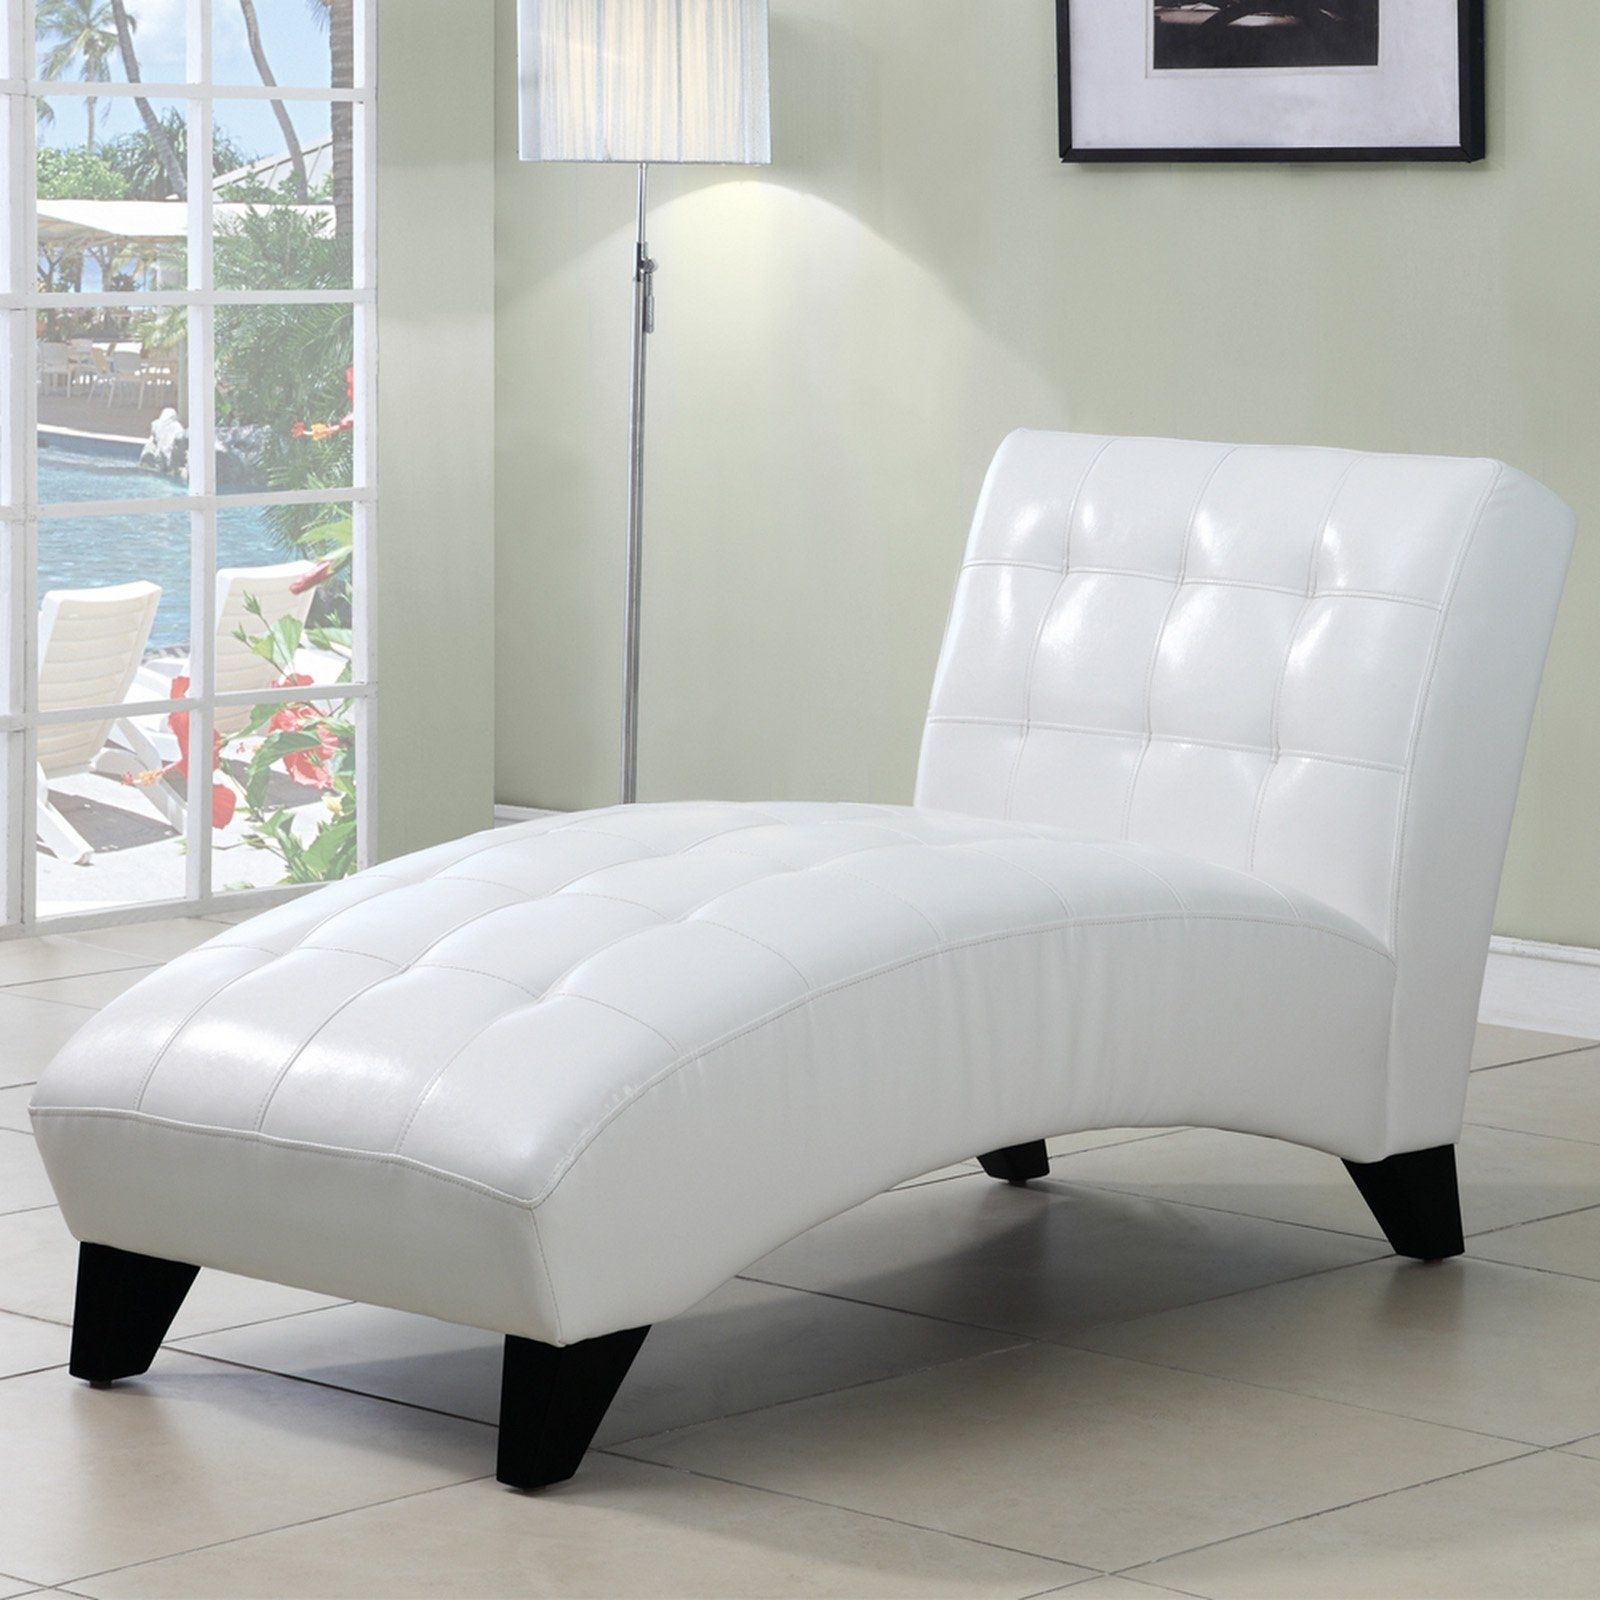 Popular White Chaise Lounges With Regard To How Really Beautiful White Chaise Lounge Design Ideas (View 11 of 15)